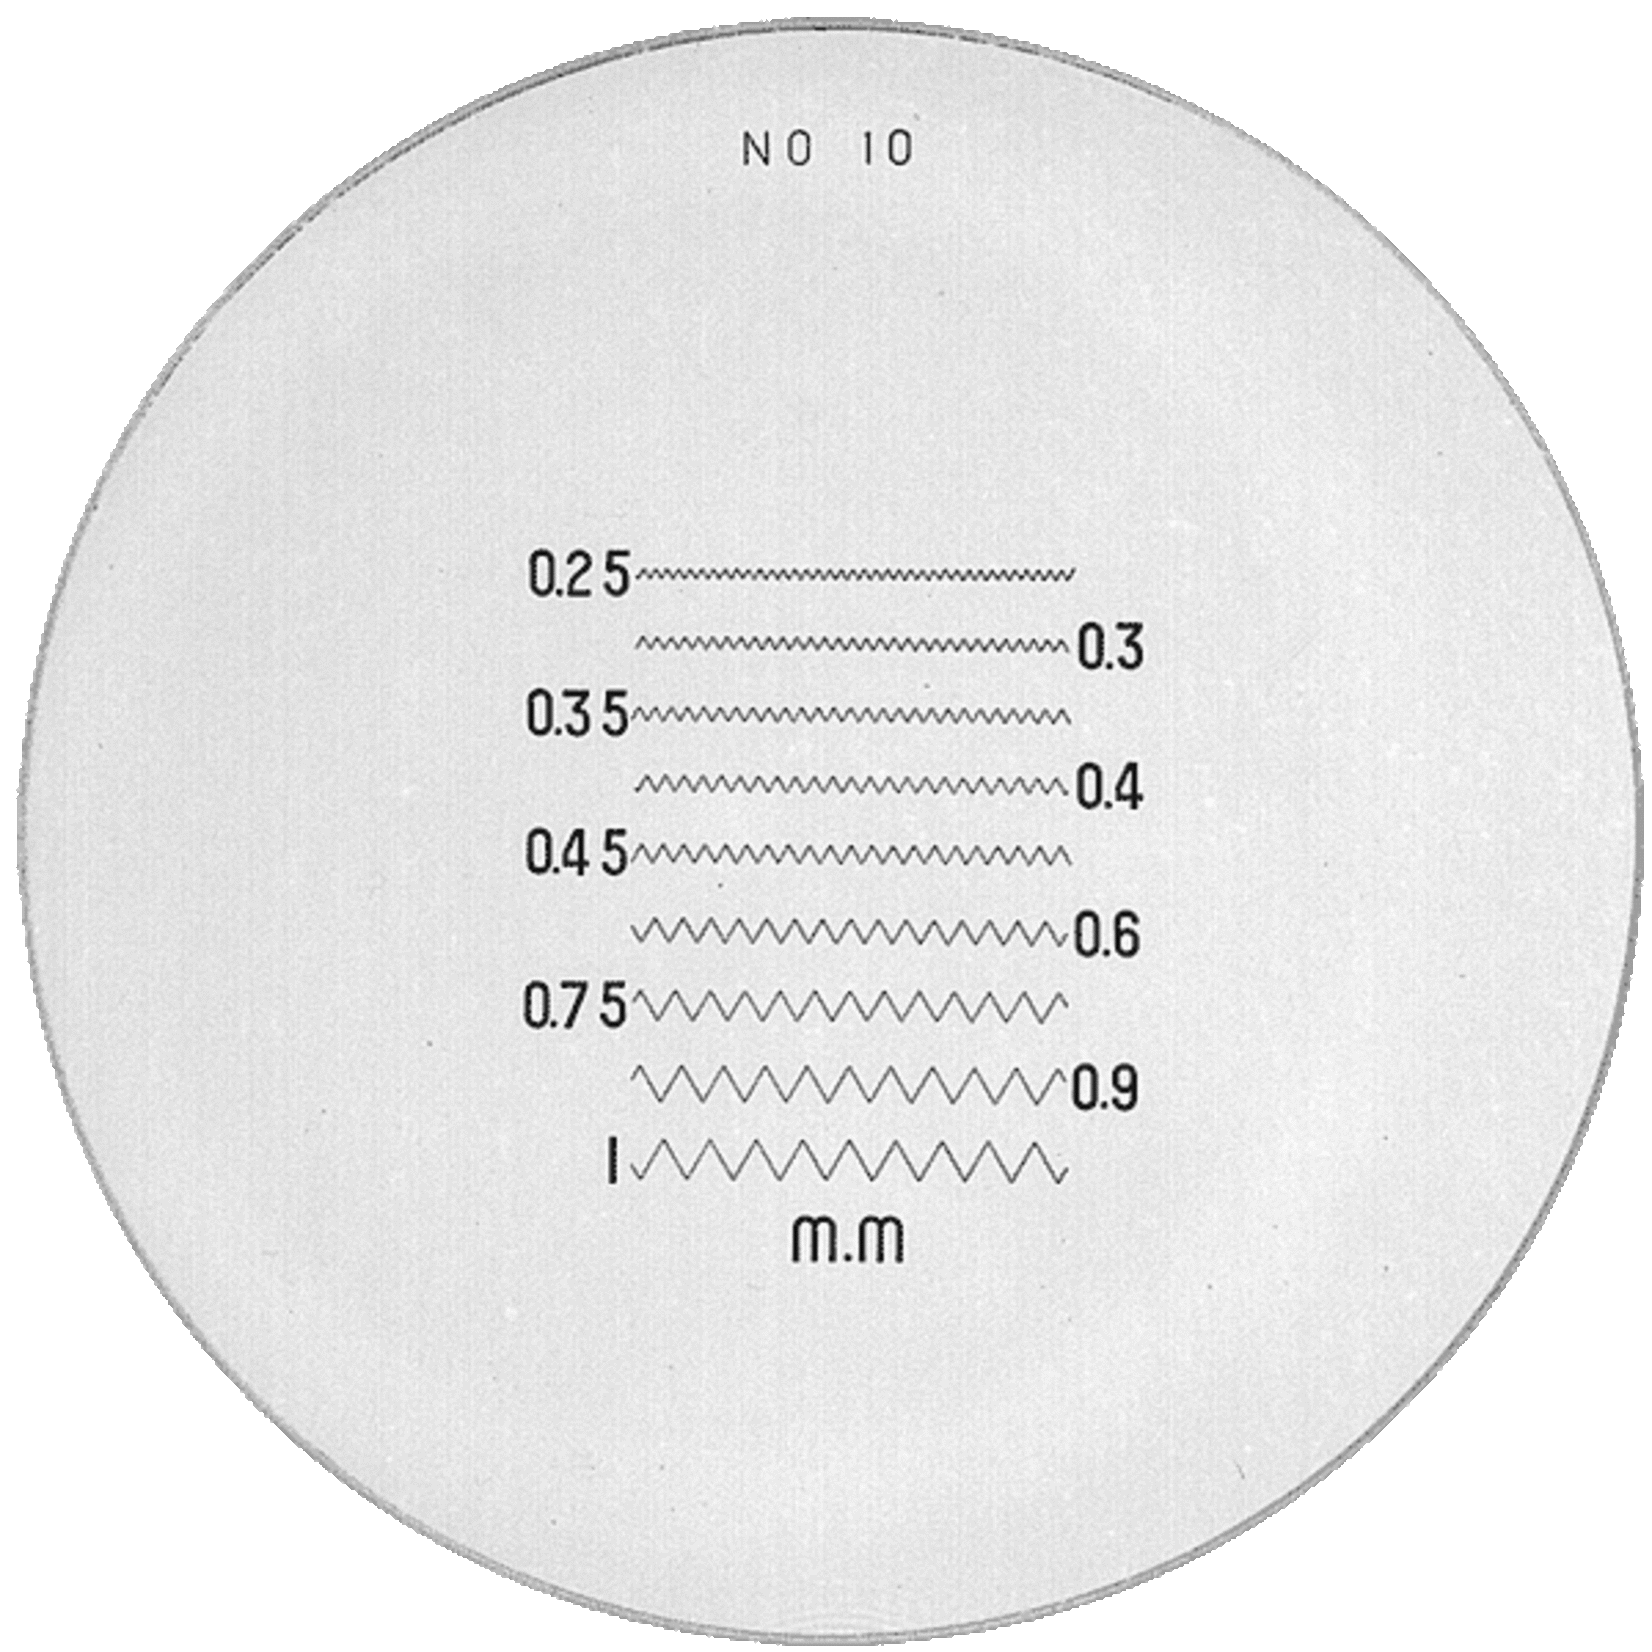 Scales for measuring magnifiers 2015, 1975, 1998 and 1976 in black